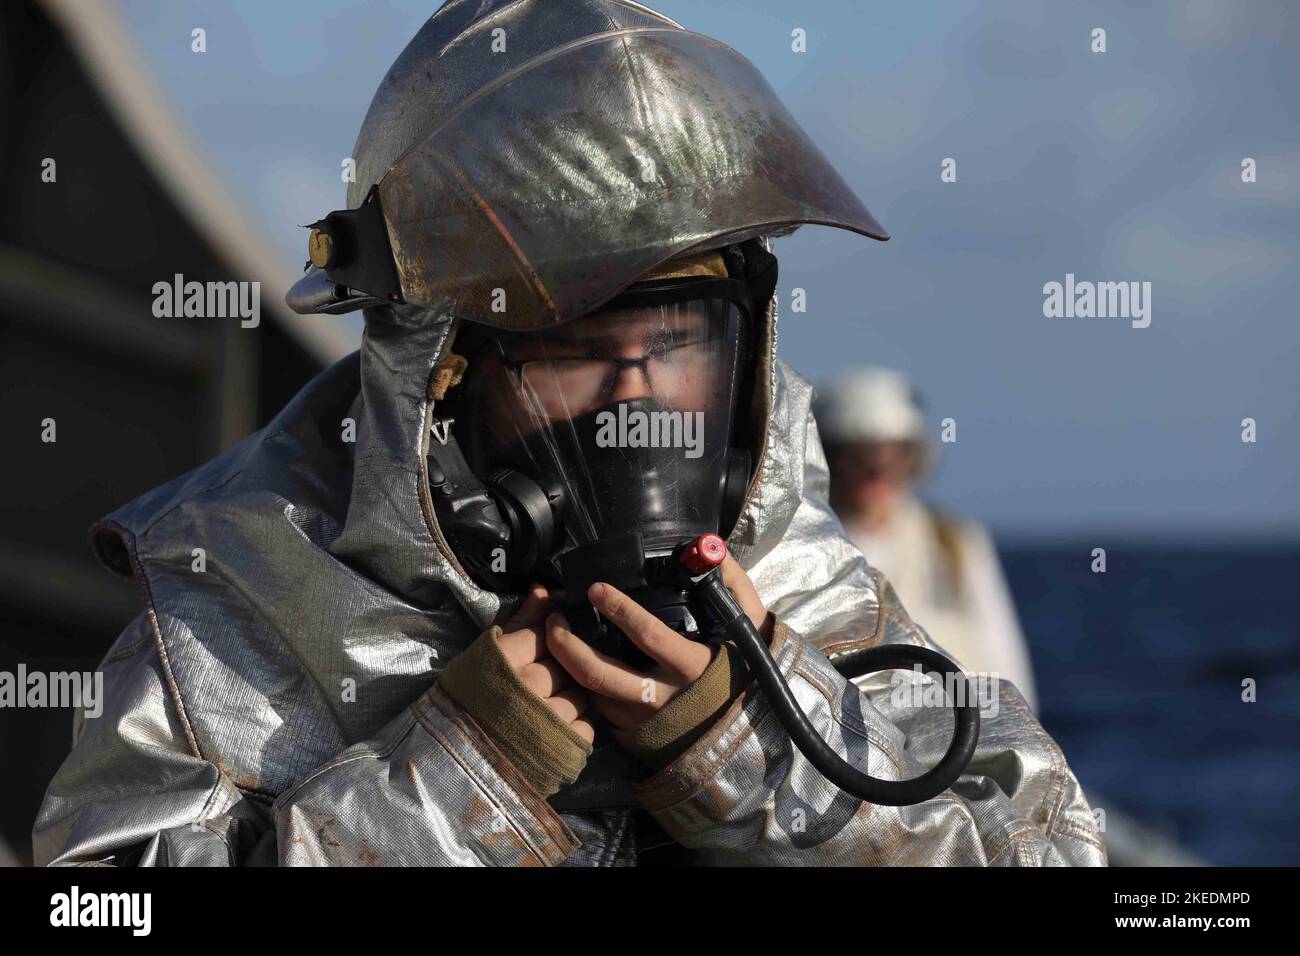 Damage Controlman 3rd Class Victor Alvarez activates his self-contained breathing apparatus during an aircraft firefighting drill aboard the Arleigh Burke-class guided-missile destroyer USS McFaul (DDG 74) while underway as part of the Gerald R. Ford Carrier Strike Group, Nov. 8, 2022, during exercise Silent Wolverine. Exercise Silent Wolverine is a U.S.-led, combined training exercise that tests Ford-class aircraft carrier capabilities through integrated high-end naval warfare scenarios alongside participating allies in the Eastern Atlantic Ocean. The Gerald R. Ford Carrier Strike Group is co Stock Photo